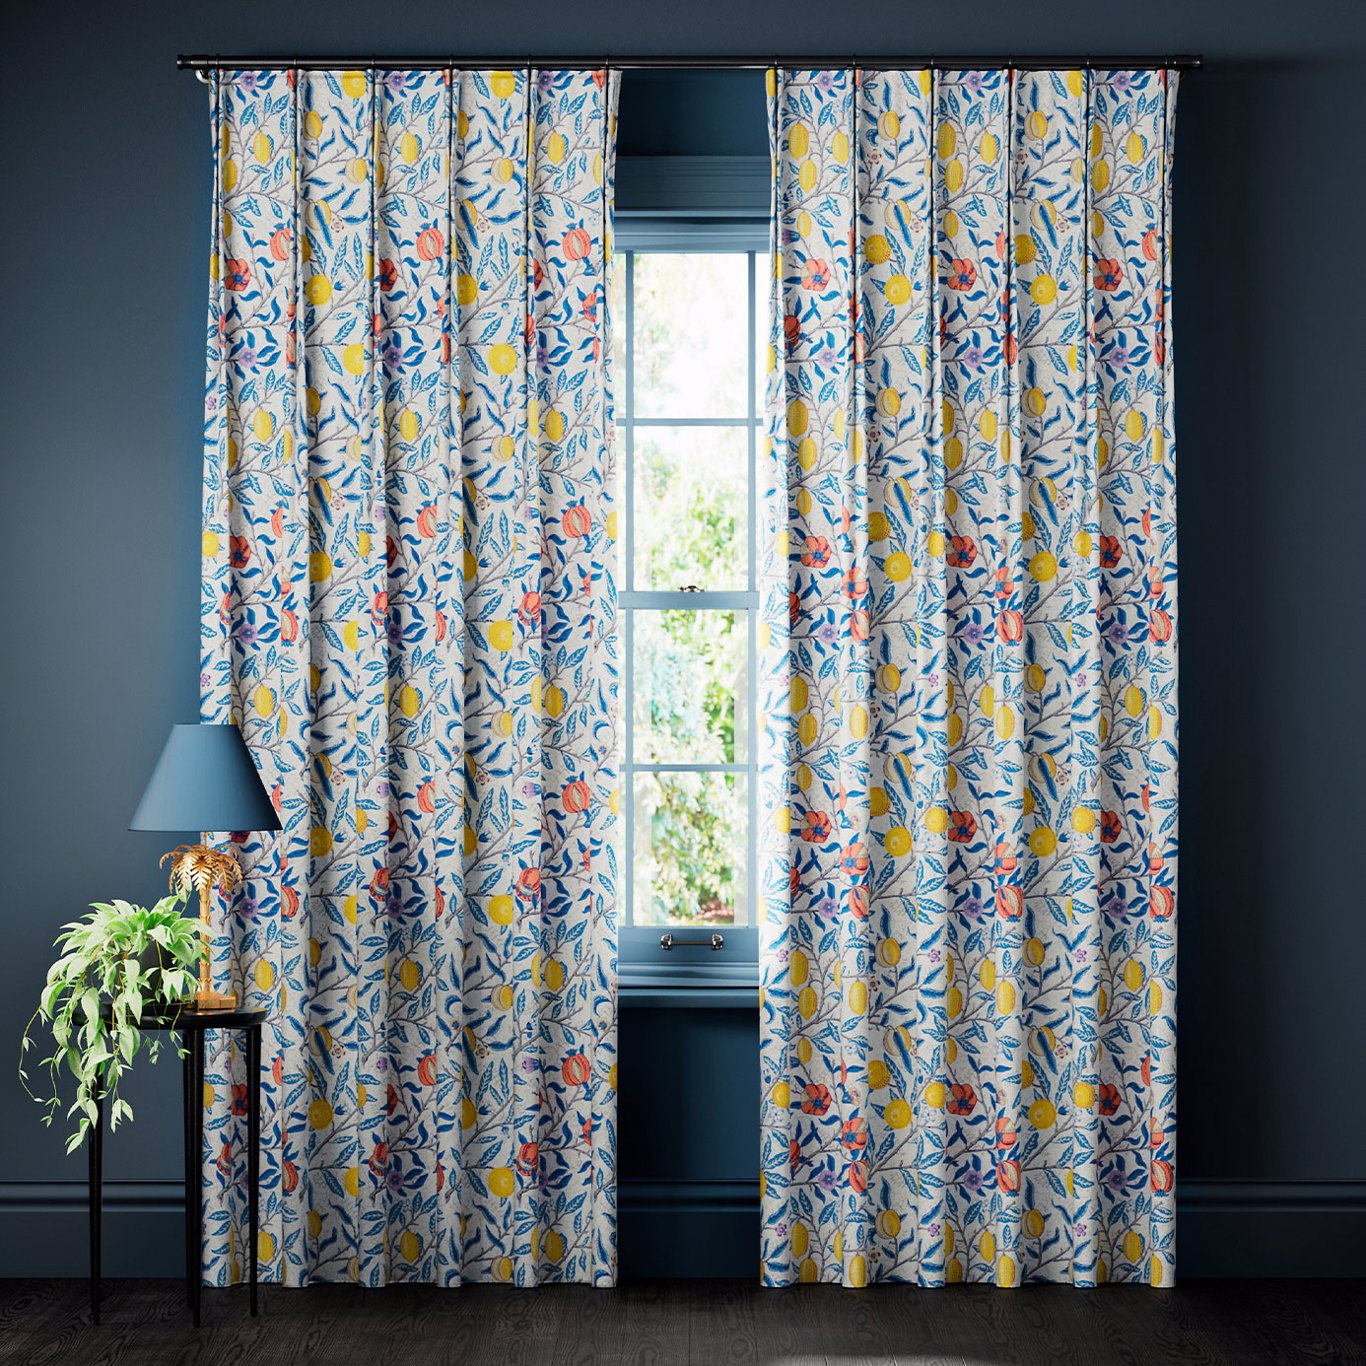 Fruit Curtains by ARC